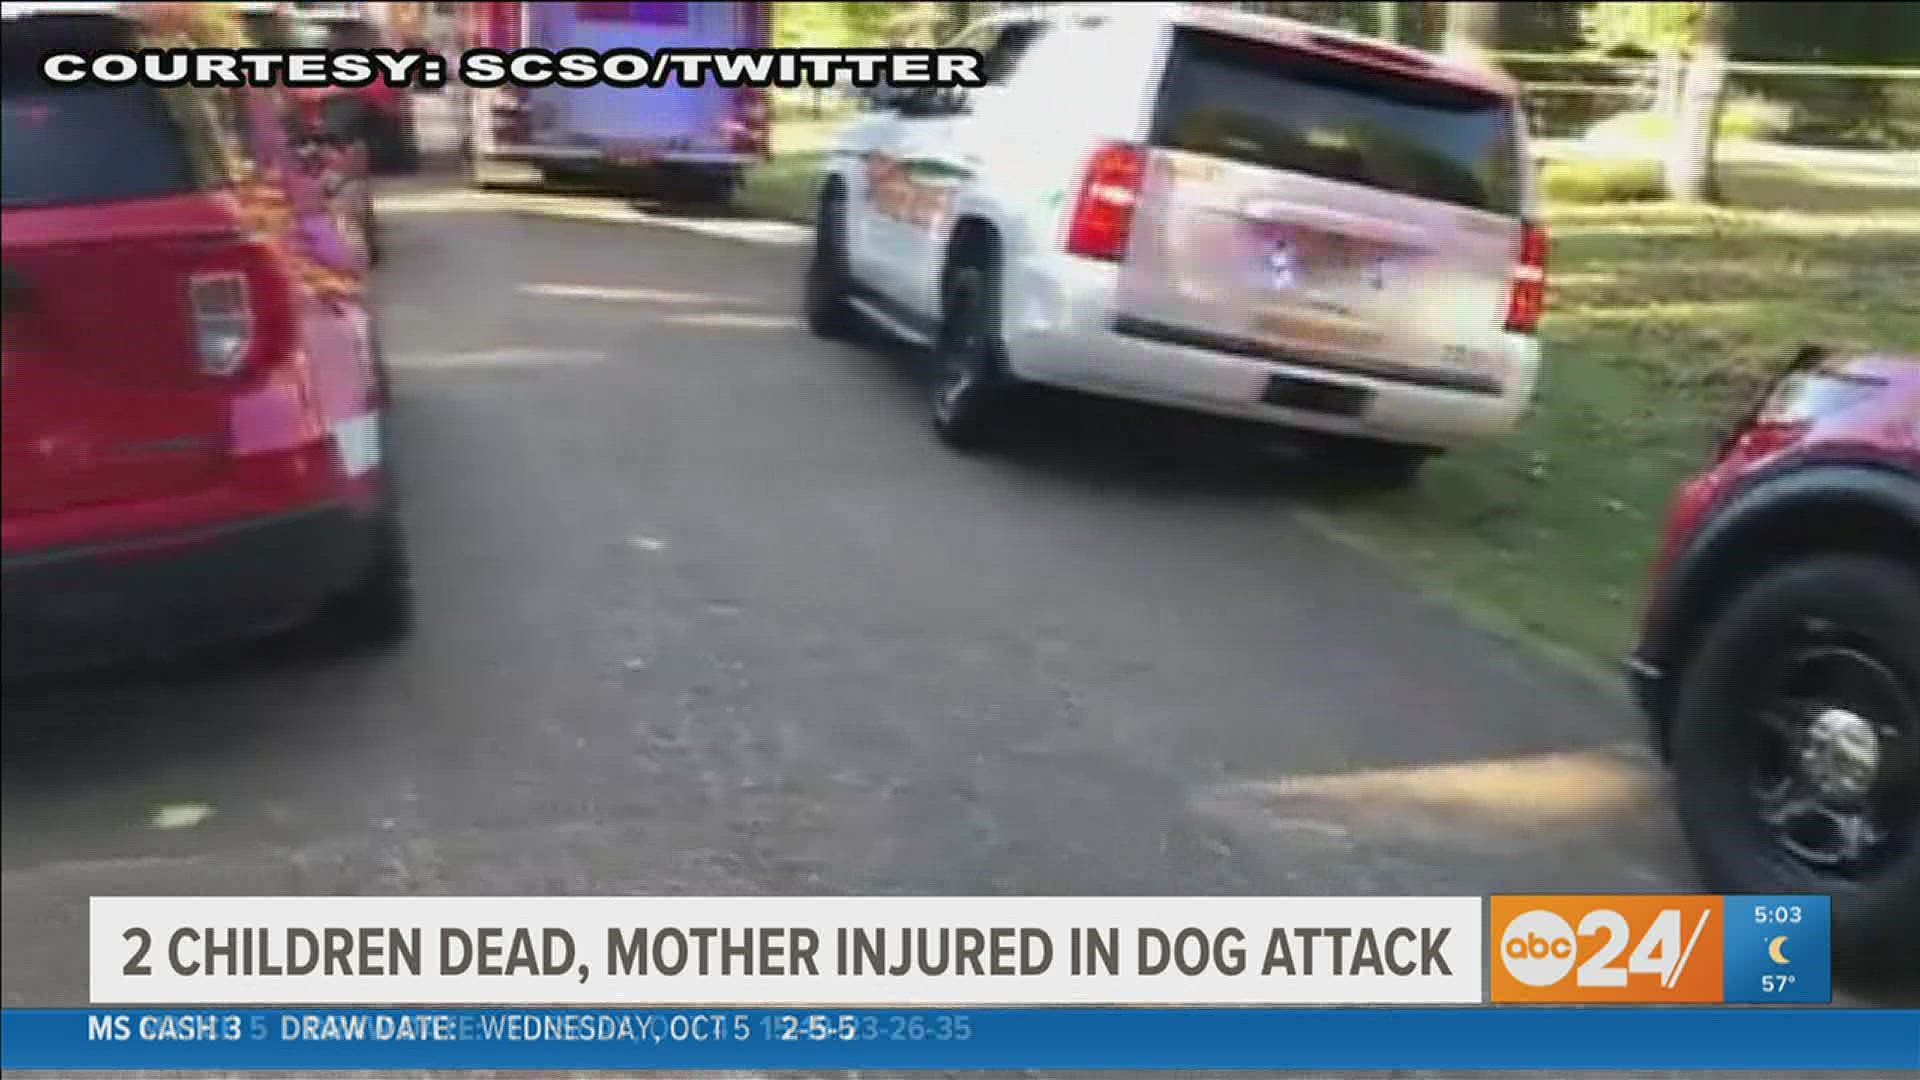 A two-year-old girl and 5-month-old boy were both killed after being attacked by their family dog. The children's mother was also critically injured in the attack.